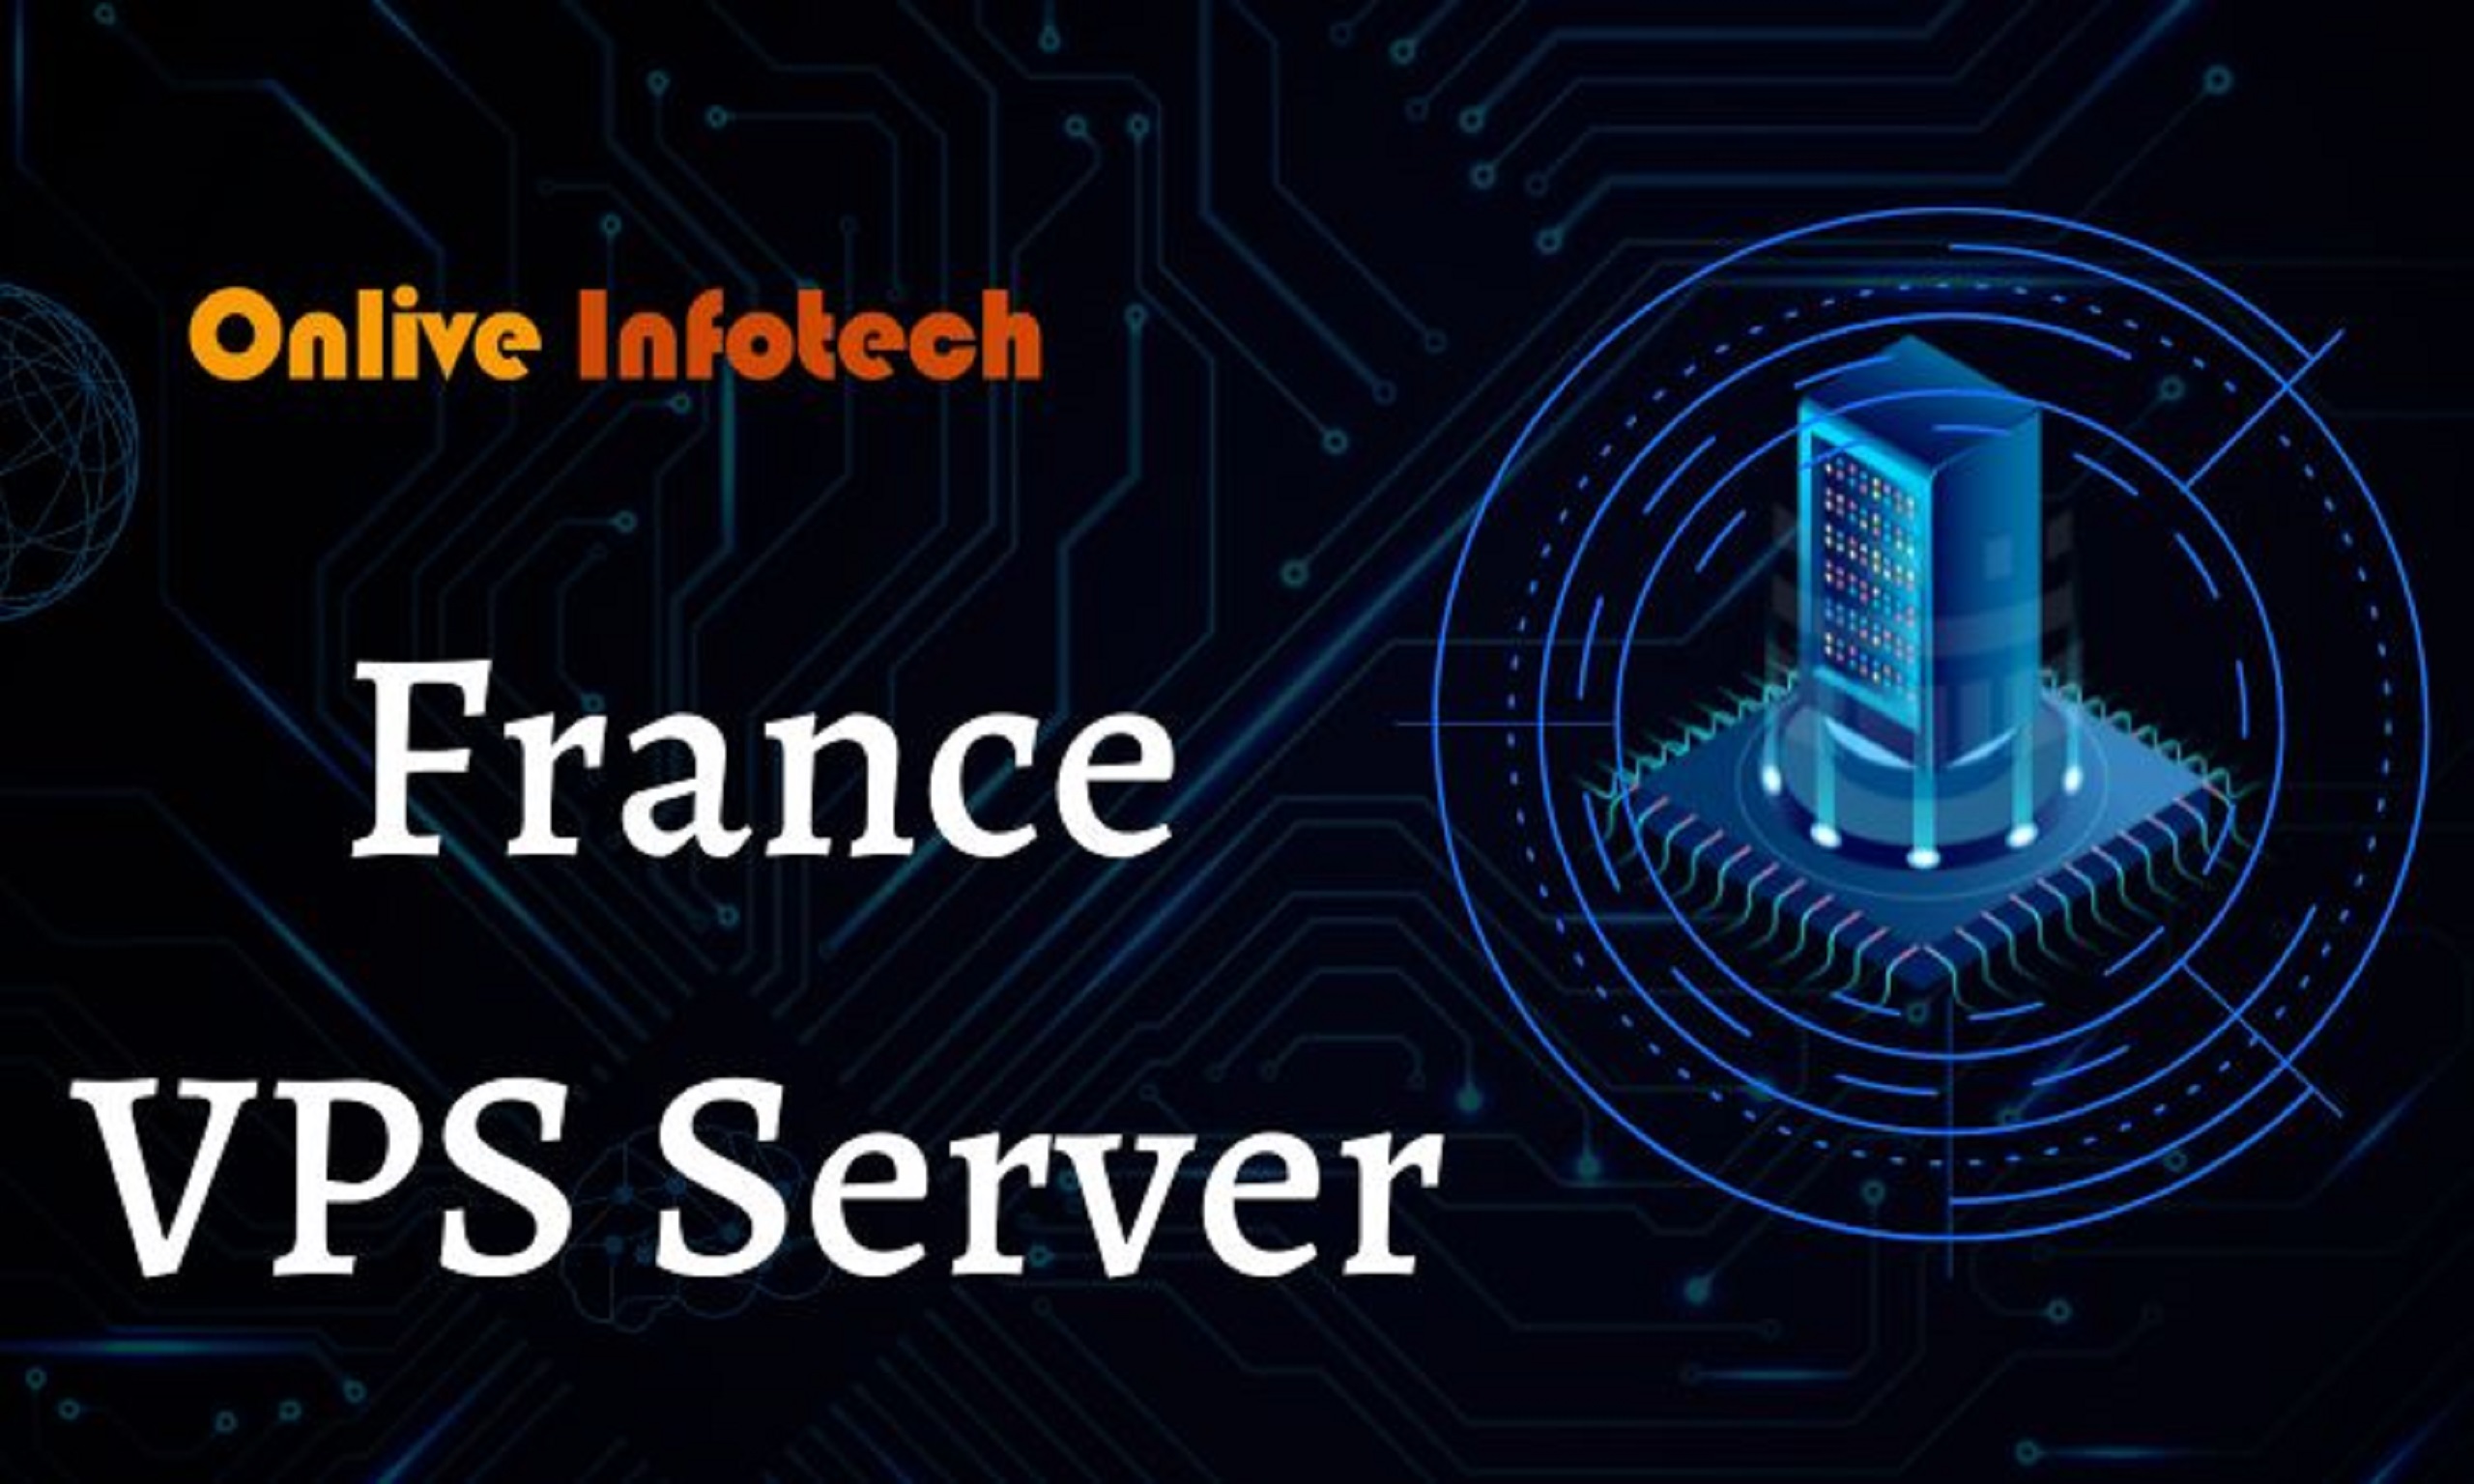 Onliveinfotech offers Cheapest France VPS Server hosting plans at low prices